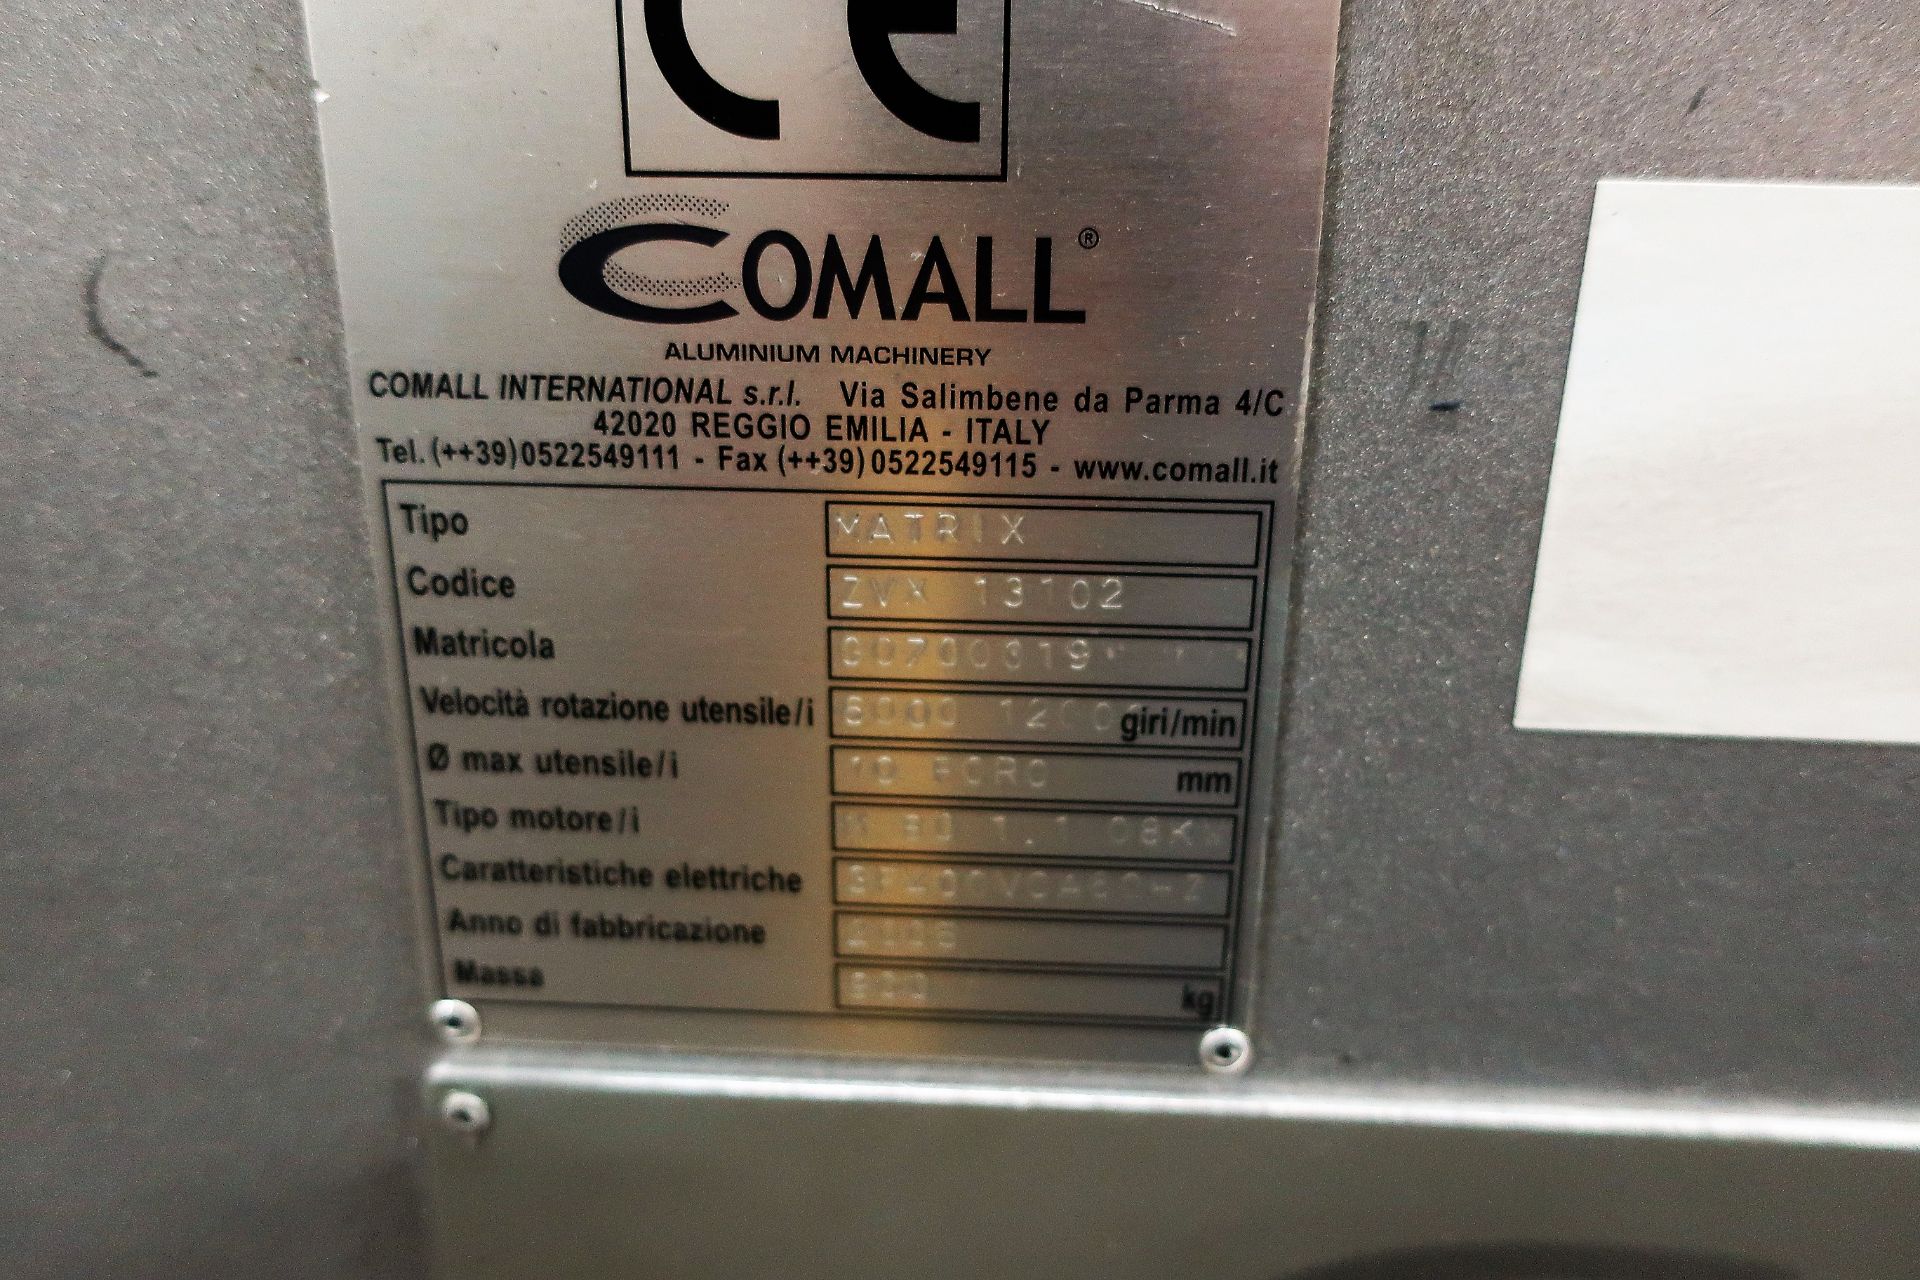 COMALL MATRIX CNE CNC 3-AXIS PROFILE MILL ROUTER, S/N G0700319, NEW 2006 - Image 6 of 6